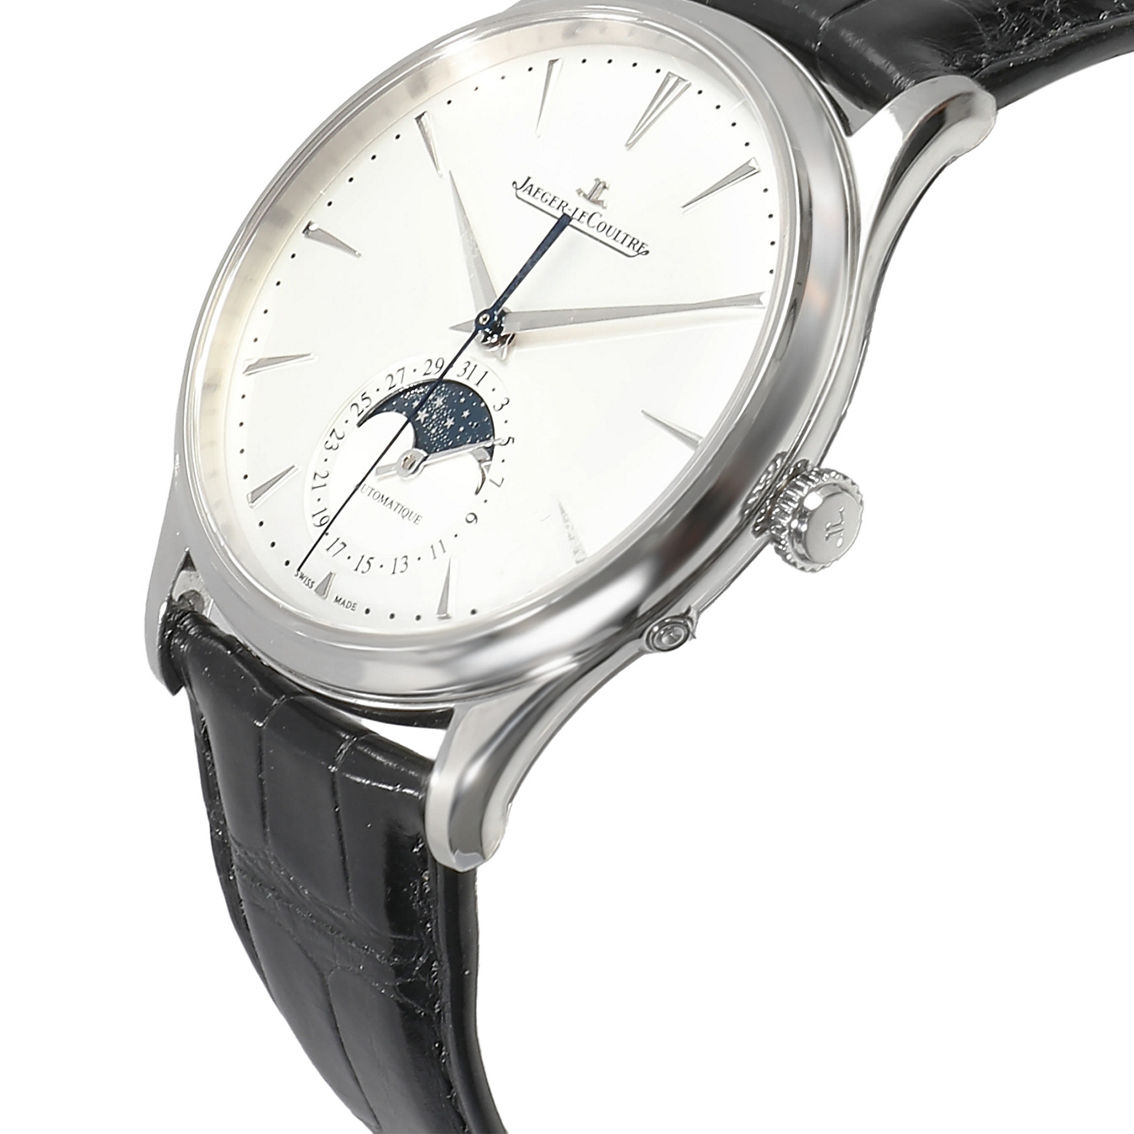 Jaeger-LeCoultre Master Ultra-Thin Pre-Owned - Image 2 of 3